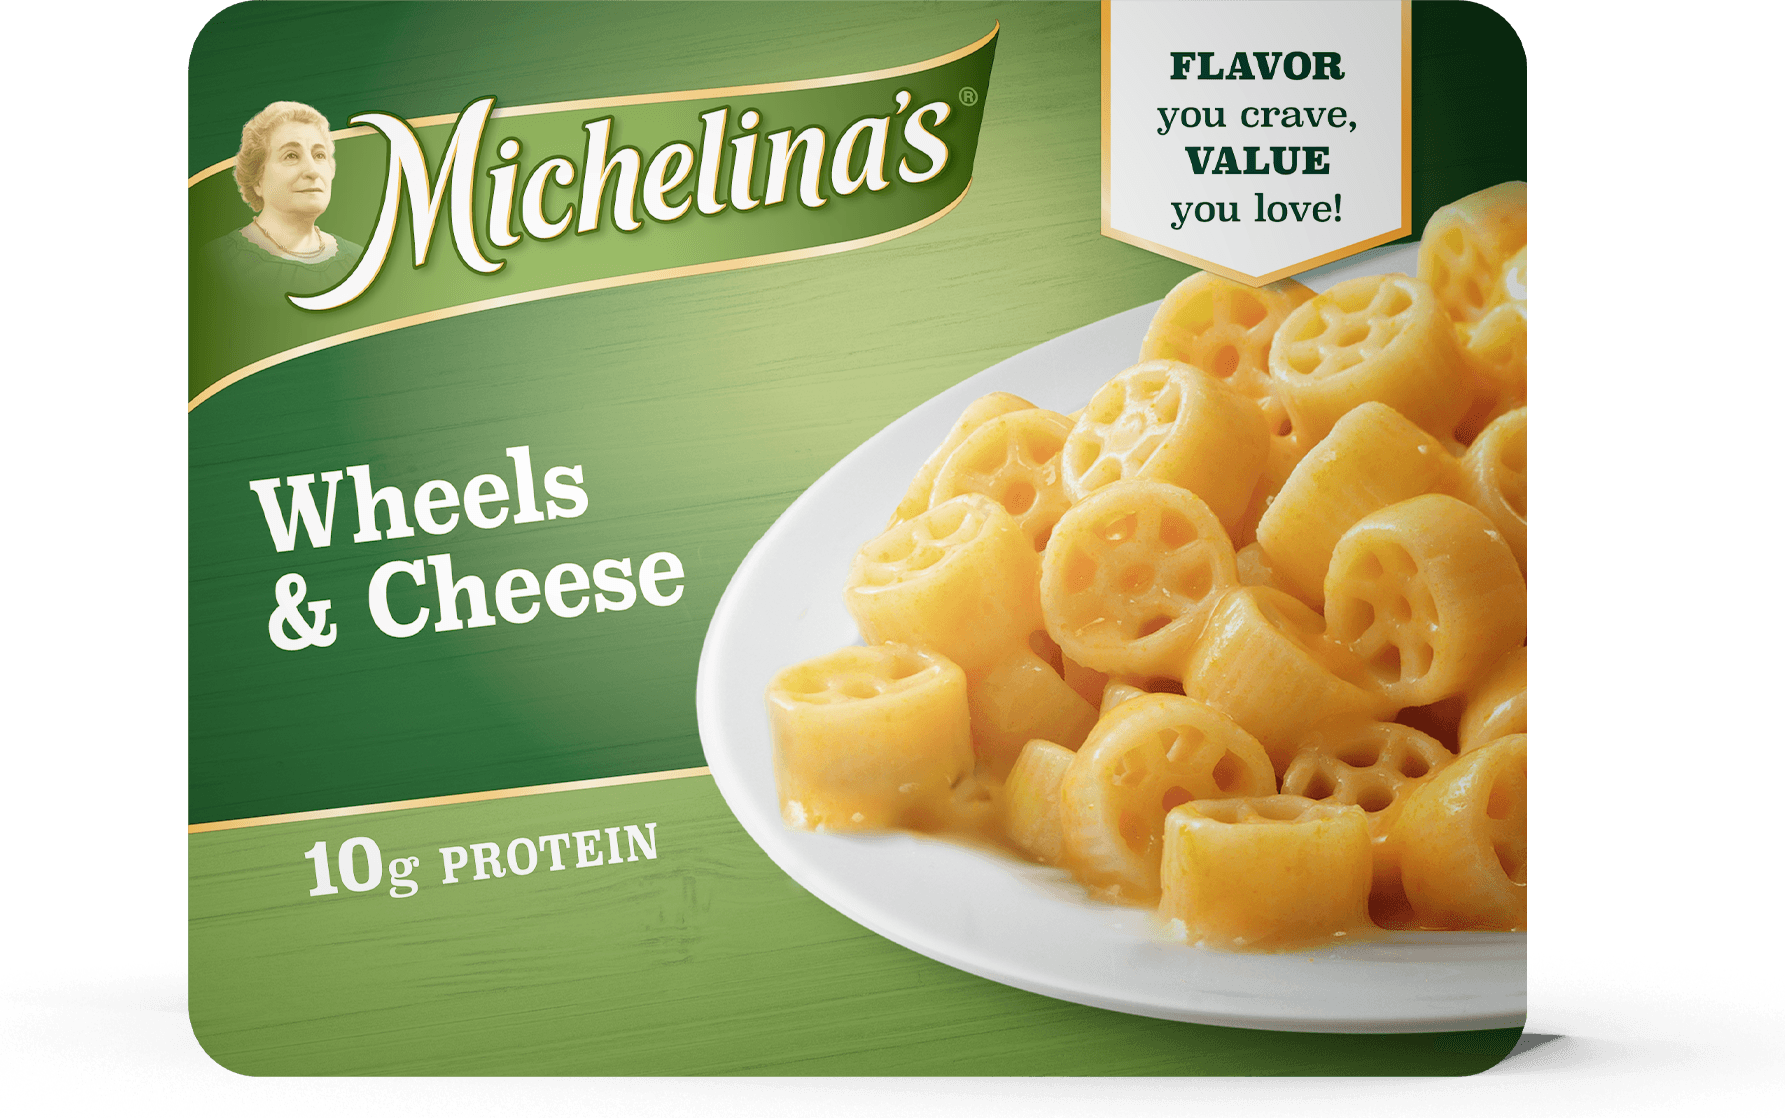 Wheels & Cheese - Michelina's Frozen Entrees